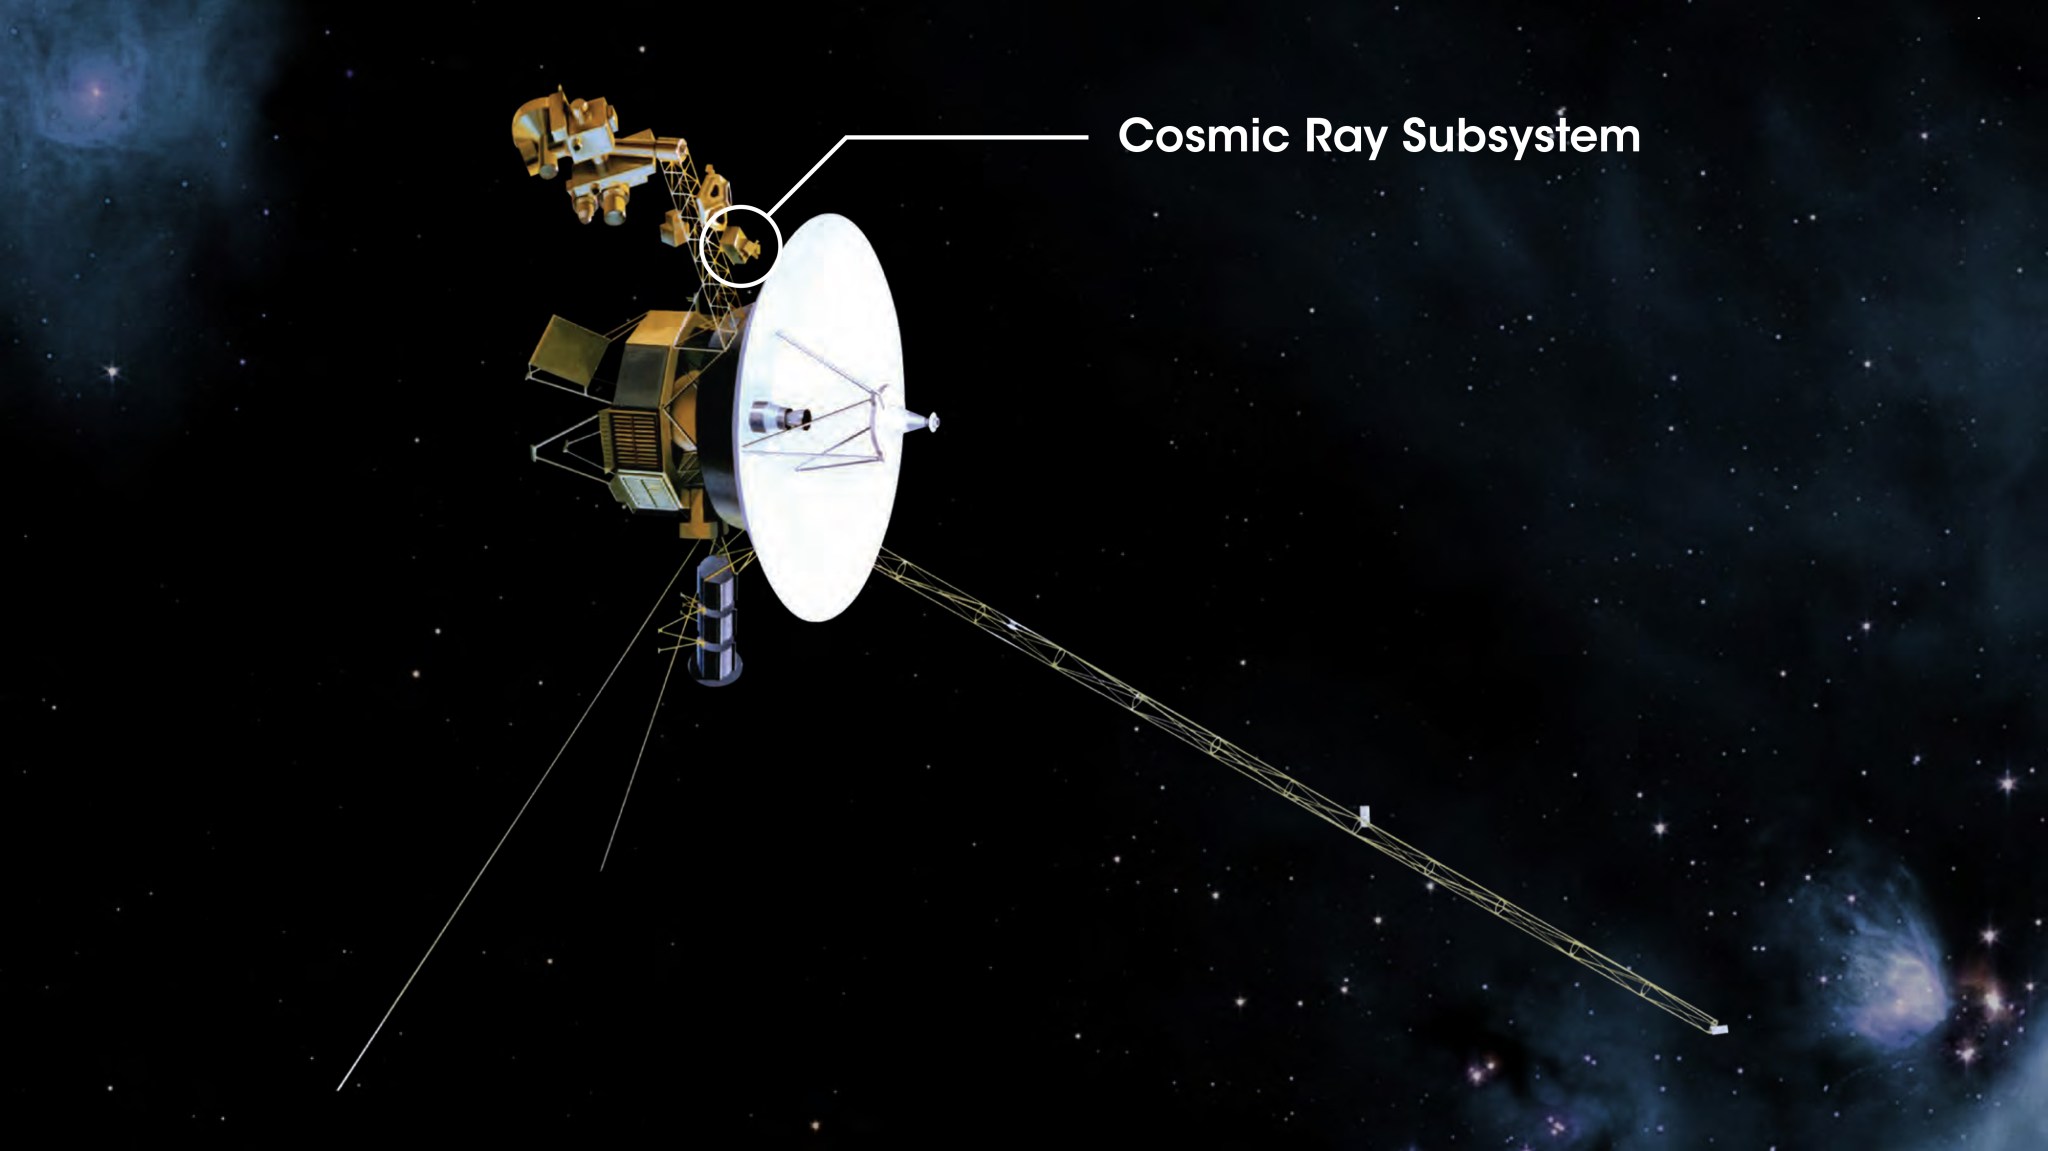 Illustration of Voyager, a gold spacecraft with a large white satellite dish and spindly antenna. A gold instrument just behind the satellite dish is labeled "Cosmic Ray Subsystem."